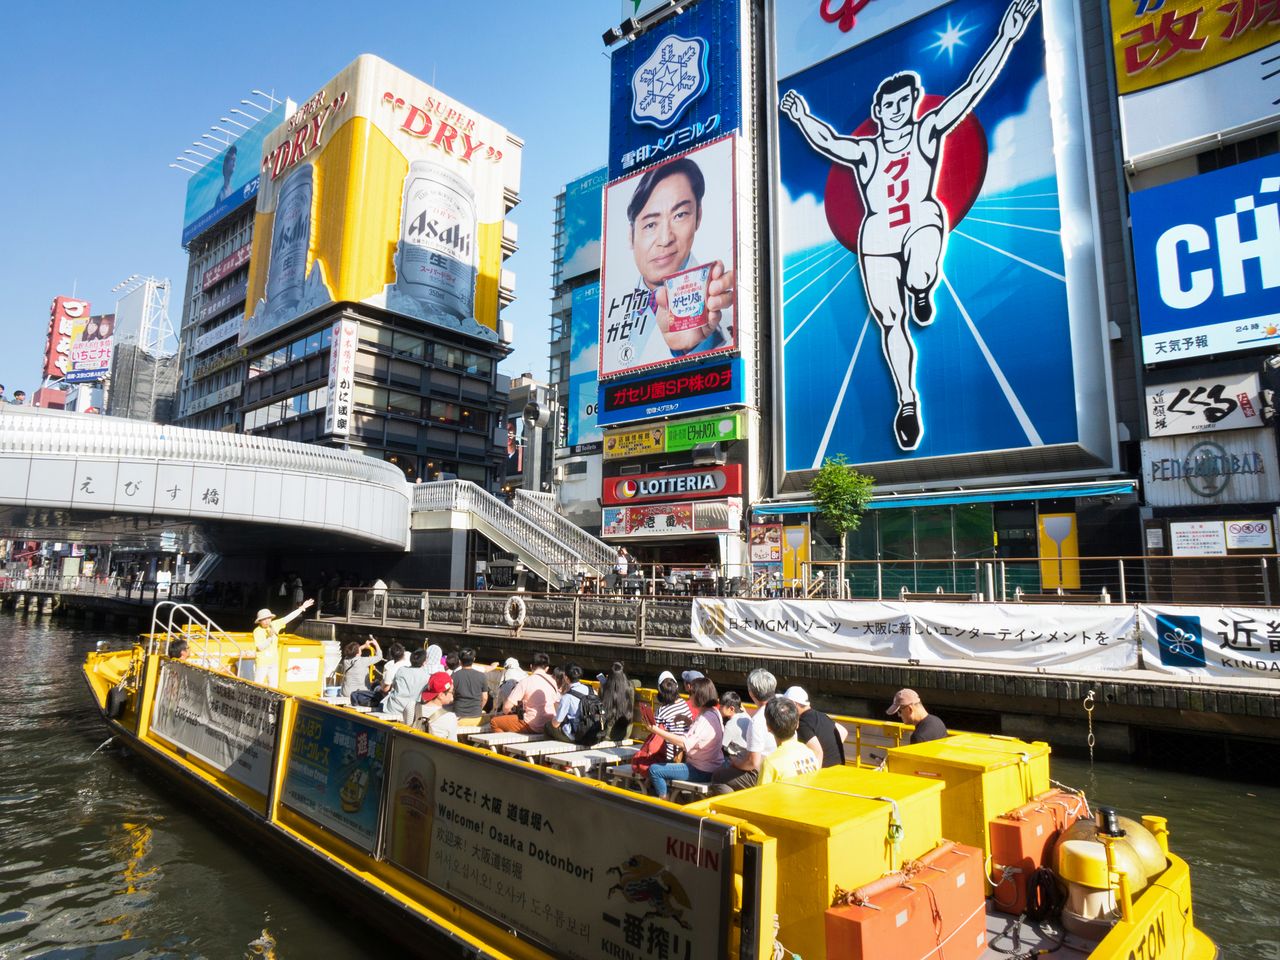 This iconic view of Minami includes Ebisubashi, known for its Glico runner billboard. The Tonbori River Cruise is a popular way of seeing Dōtonbori from a boat.